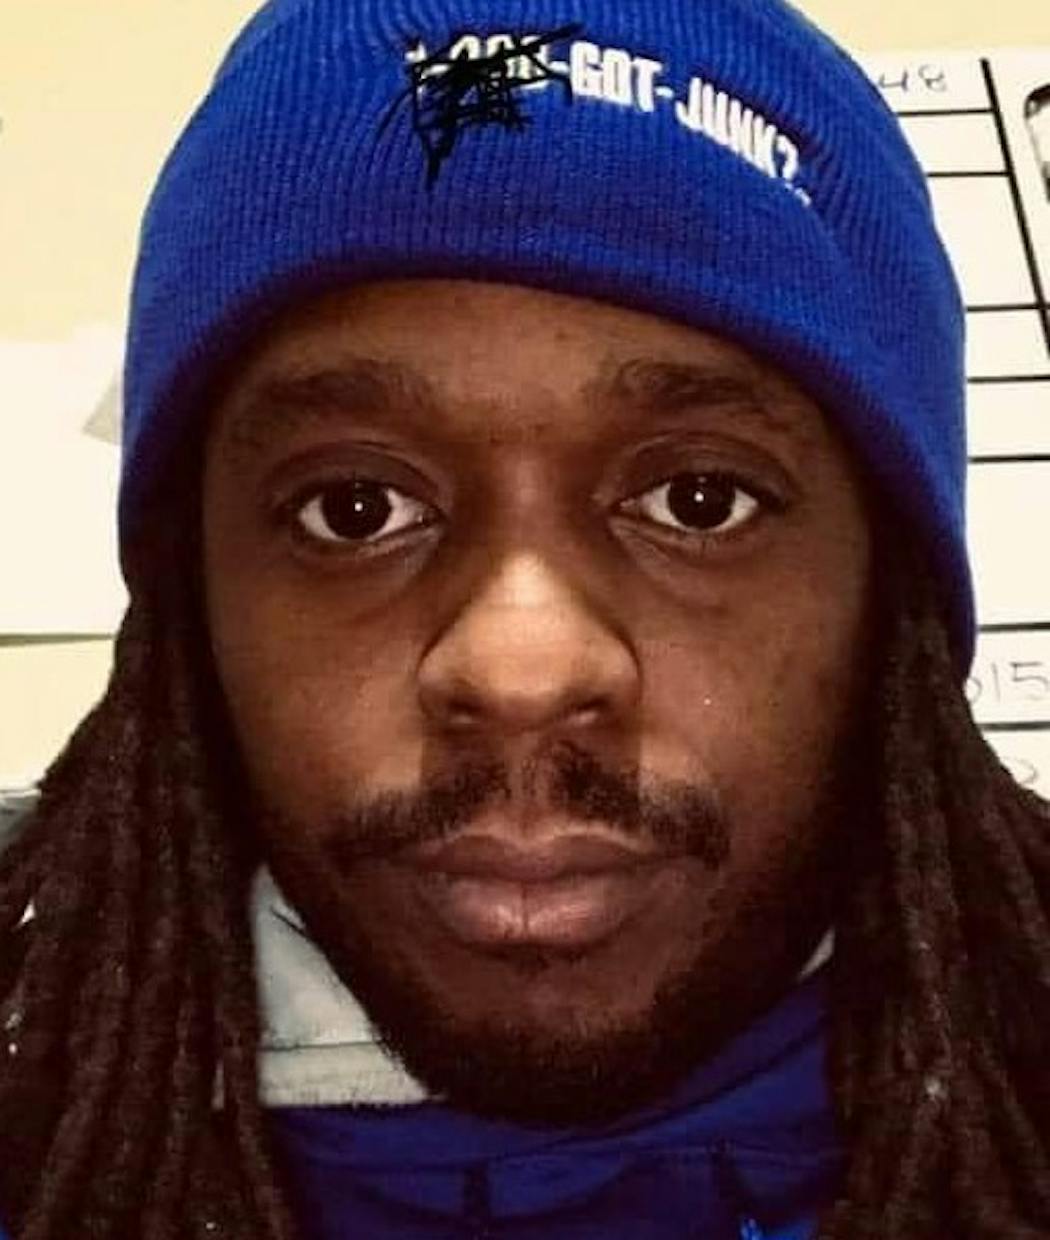 Douglas Lewis, 39, of St. Paul, had left a barbecue on the city's West Side and promised to return after picking up his car.